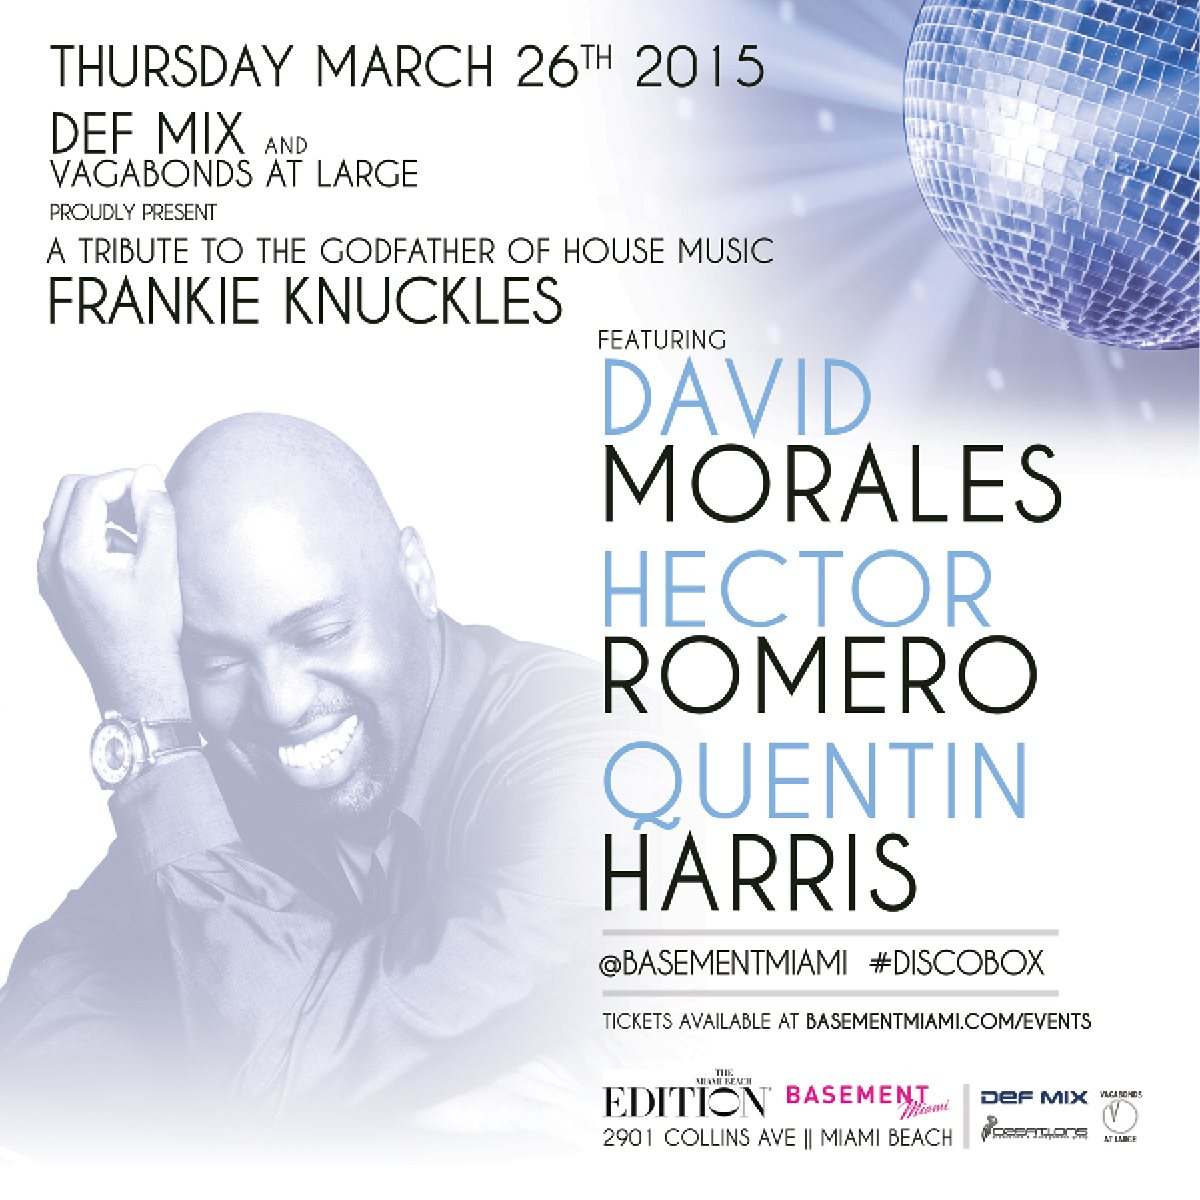 DEF MIX - Tribute to Frankie Knuckles with David Morales, Hector Romero, Quentin Harris - Flyer front